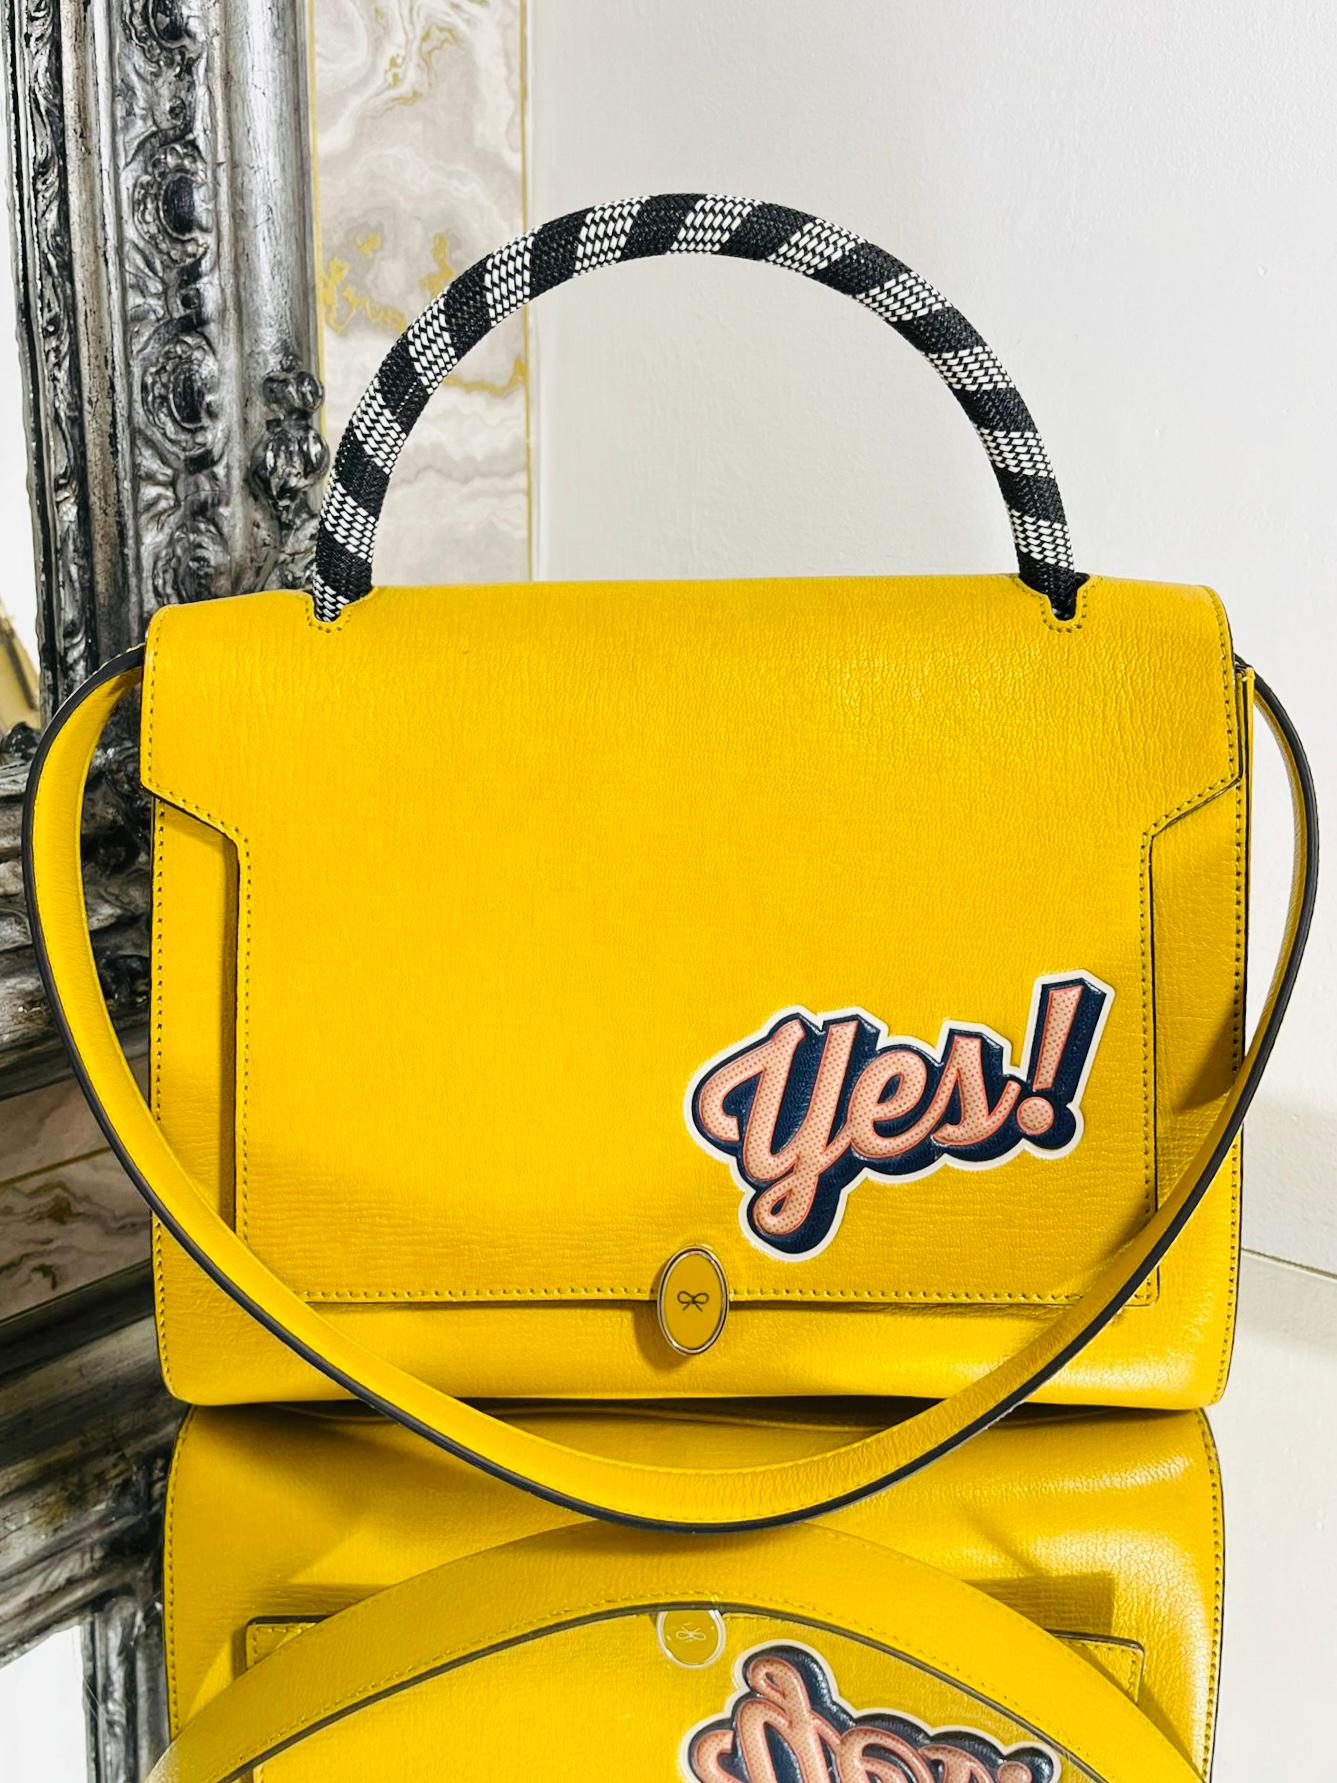 Anya Hindmarch Leather Handbag

Structured bag in yellow with oversized flap adorned with a  enamel logo closure.

Having a 'YES' sticker to the front and a 'NO' sticker to the rear.

Woven black and white top carry handle and removable yellow